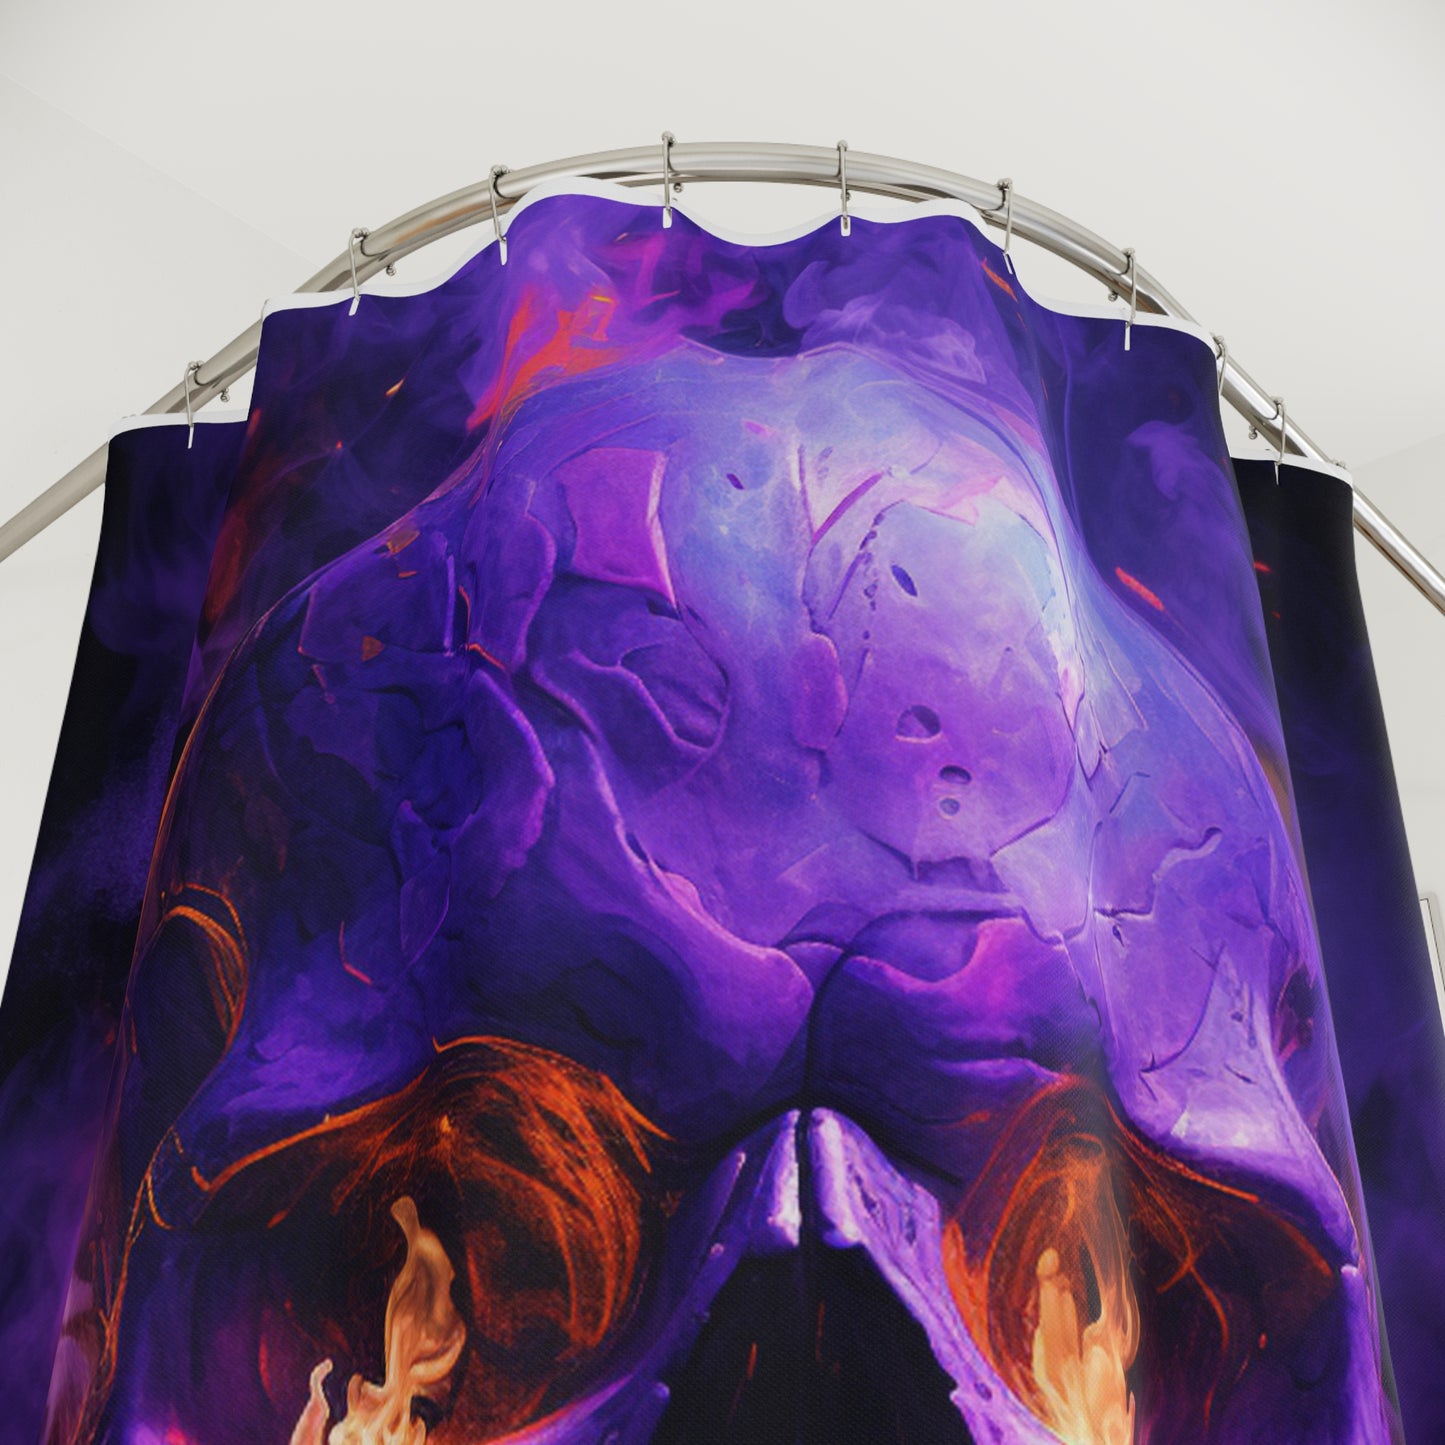 Polyester Shower Curtain Skull Flames 1